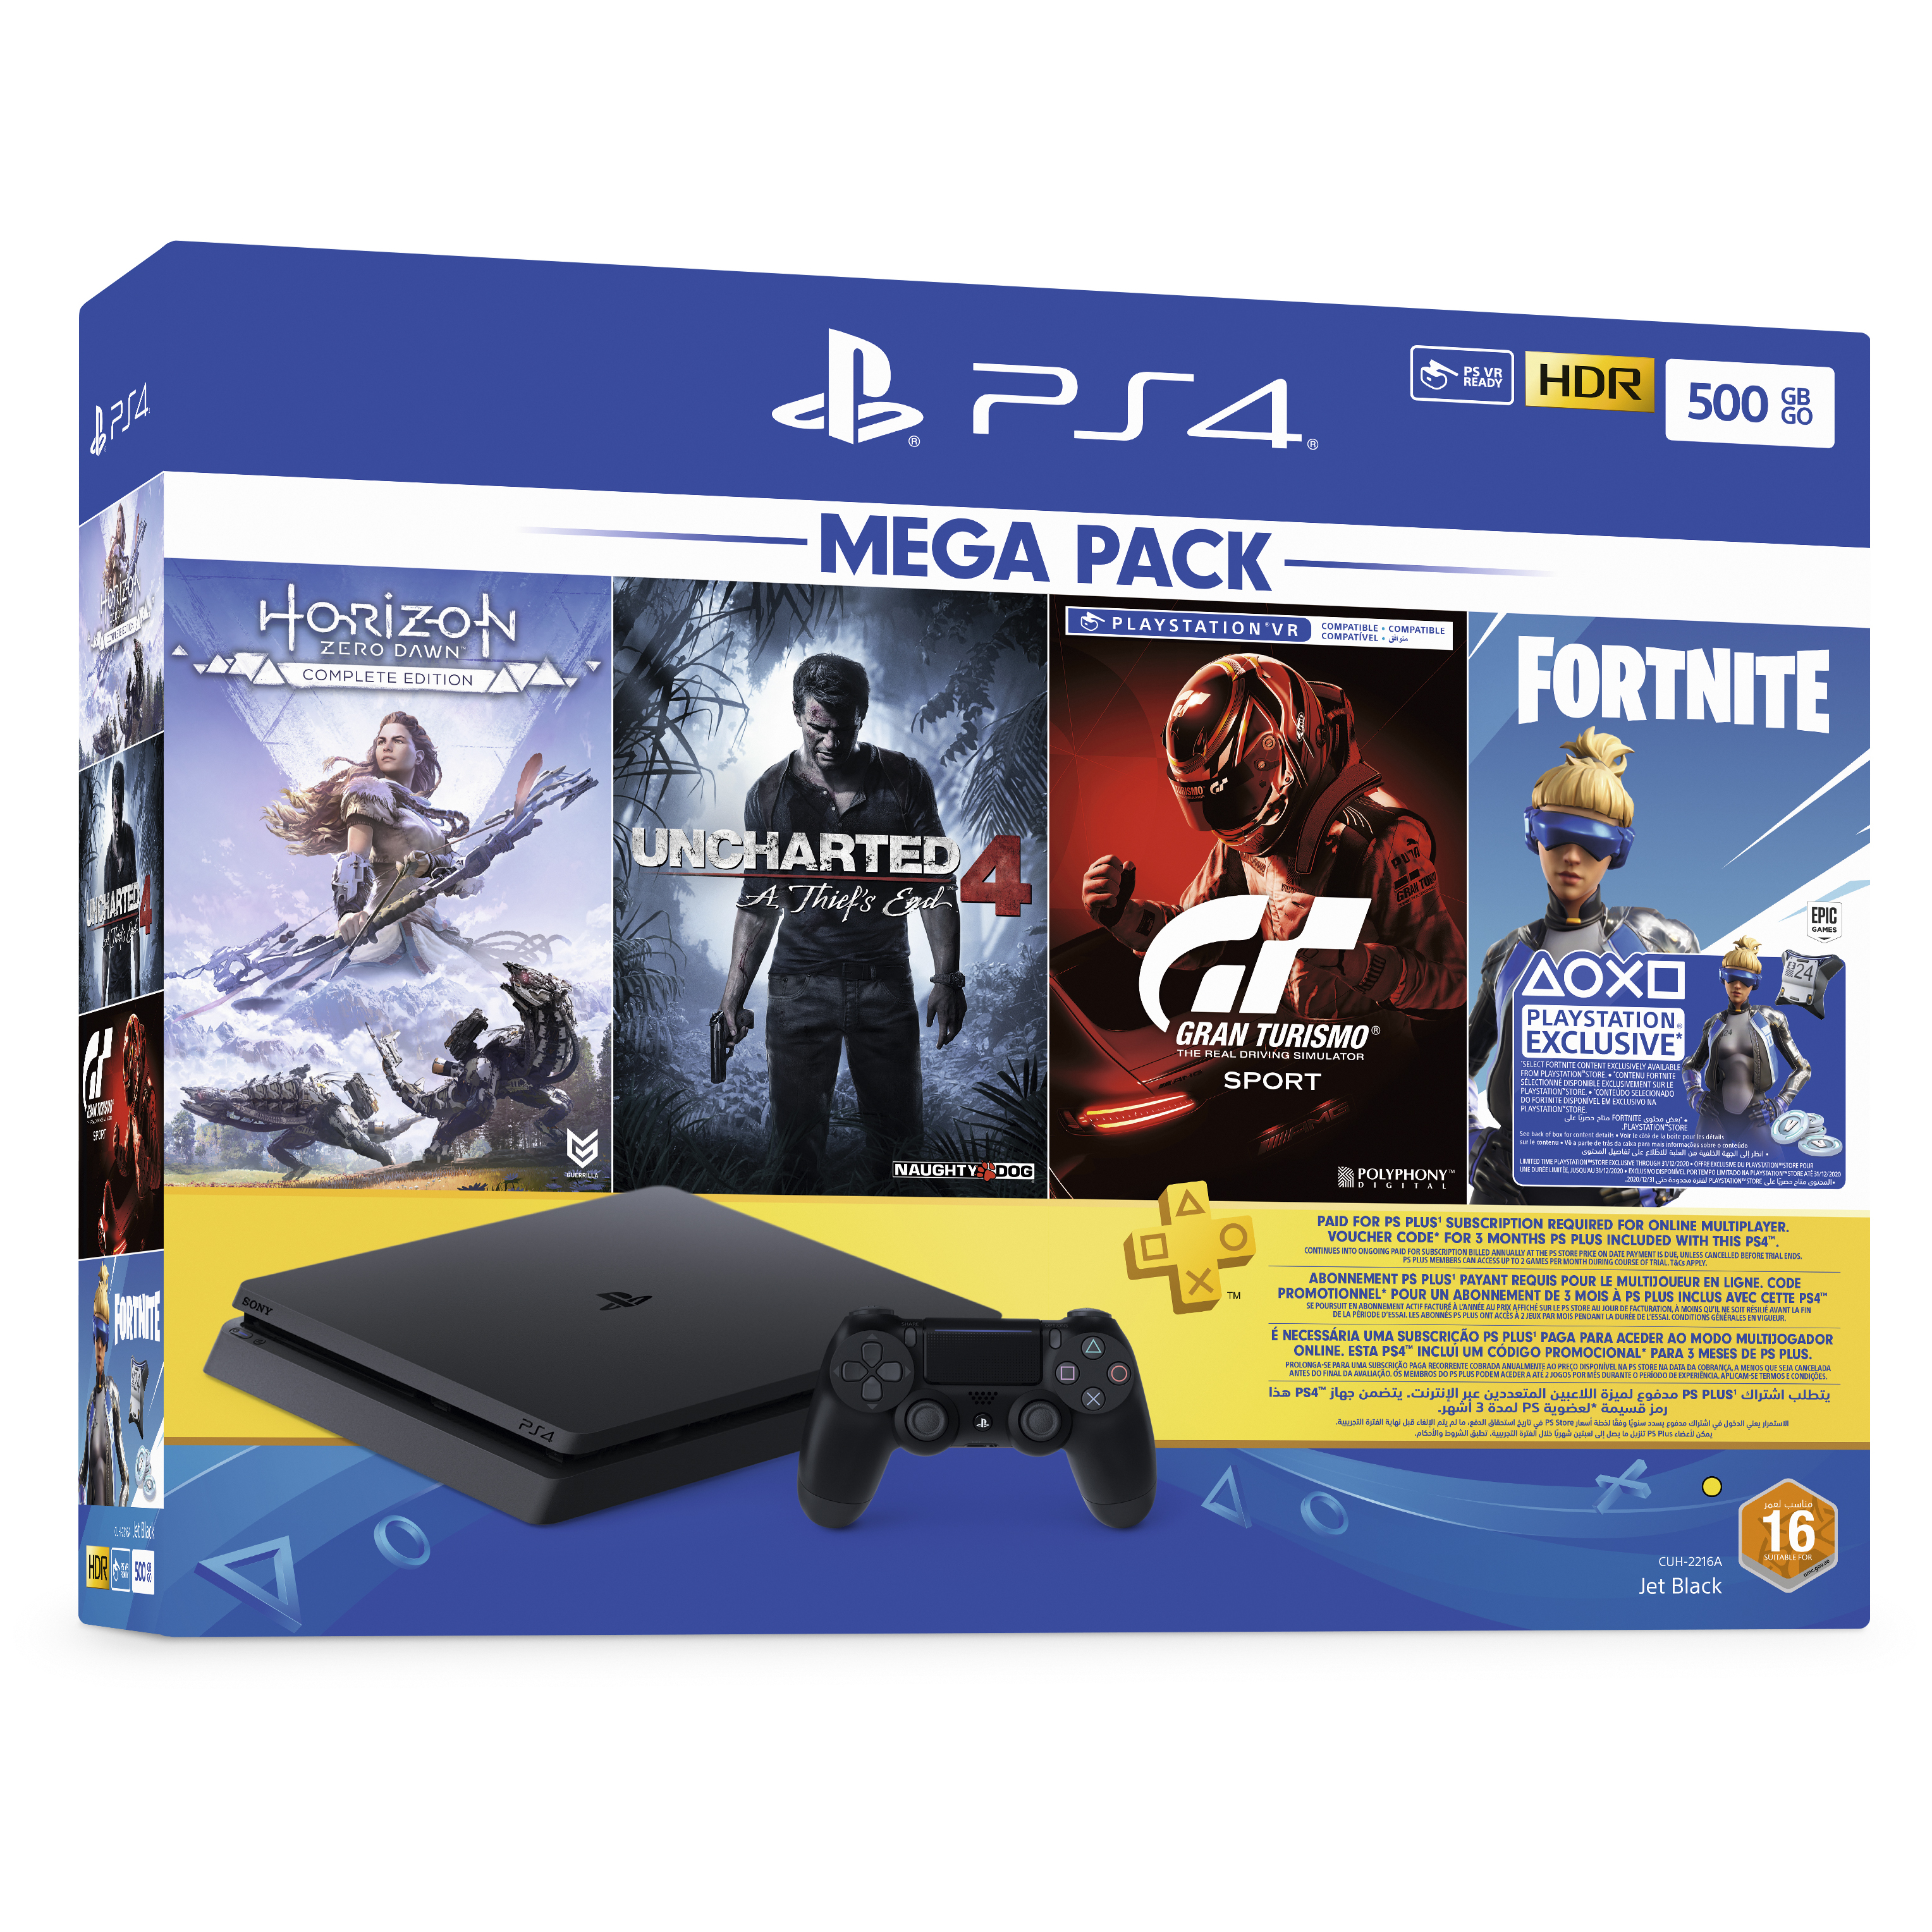 Buy Sony PS4 Slim Gaming Console 500GB + Horizon Zero Dawn Complete Edition + Uncharted 4 A Thief's End + PSVR Gran Turismo Sport + Fortnite + PS Plus 3 Months Code Online in UAE | Sharaf DG